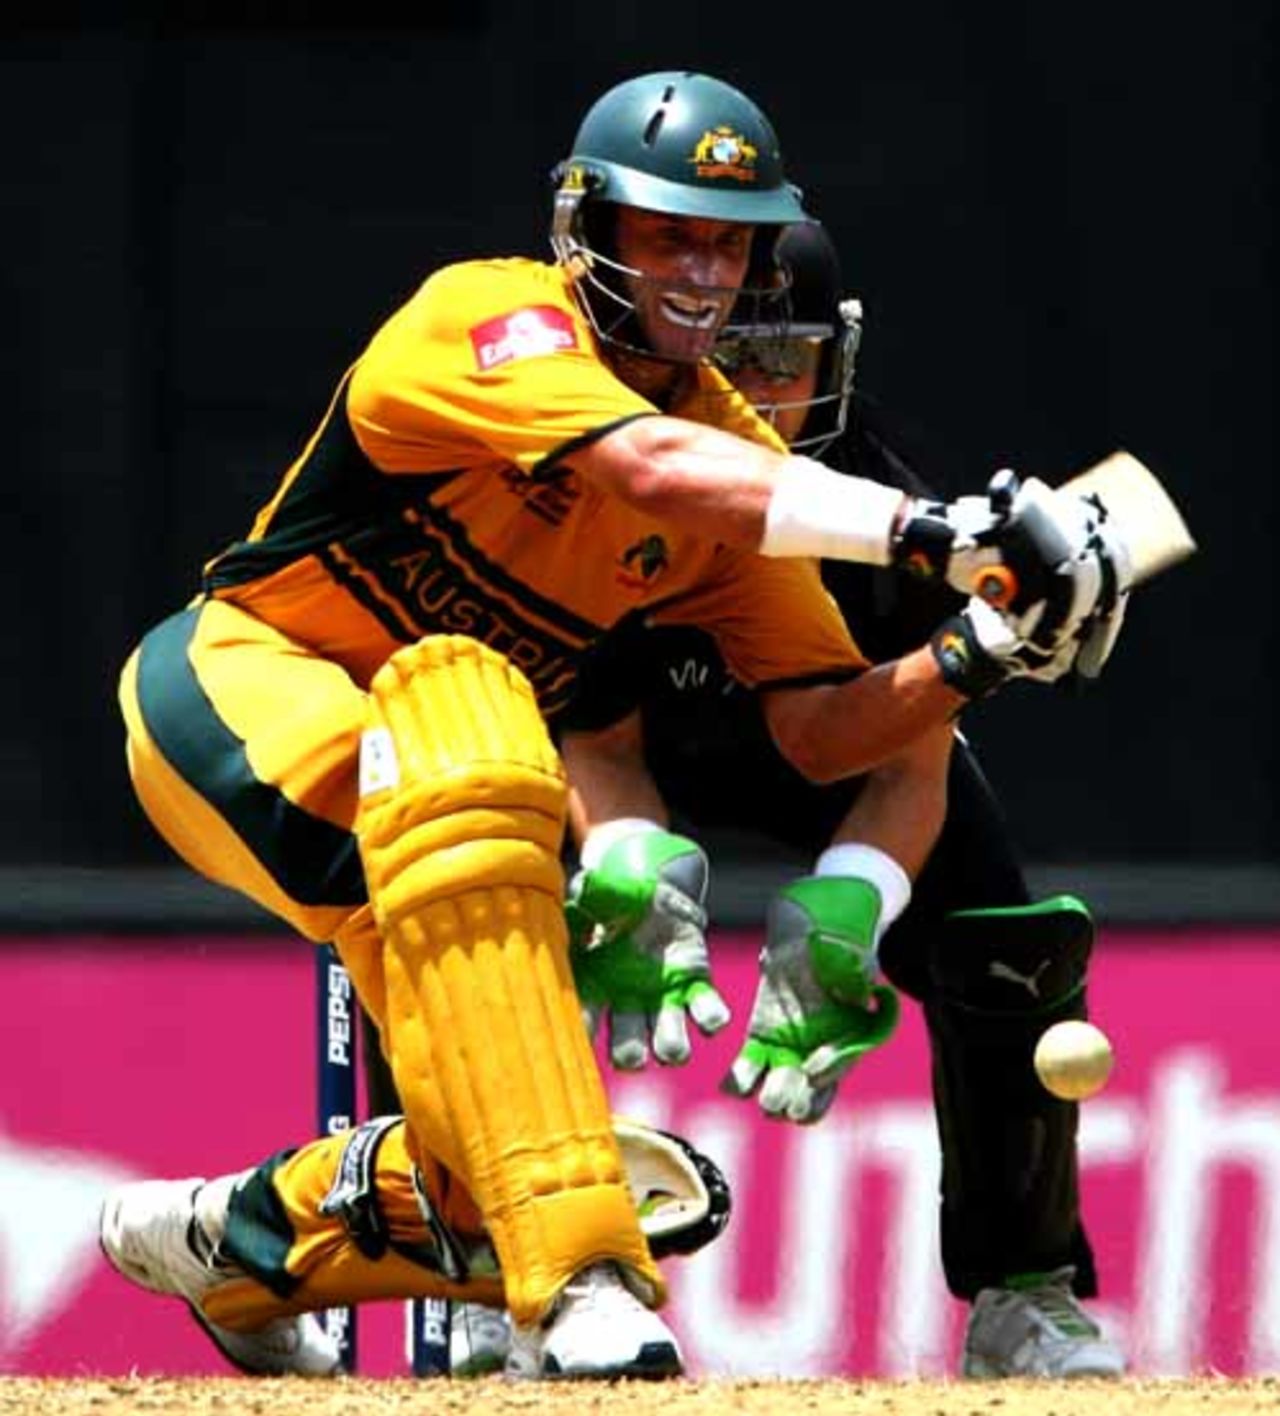 Mike Hussey gets down on his knee to sweep, Australia v New Zealand, Super Eights, Grenada, April 20, 2007